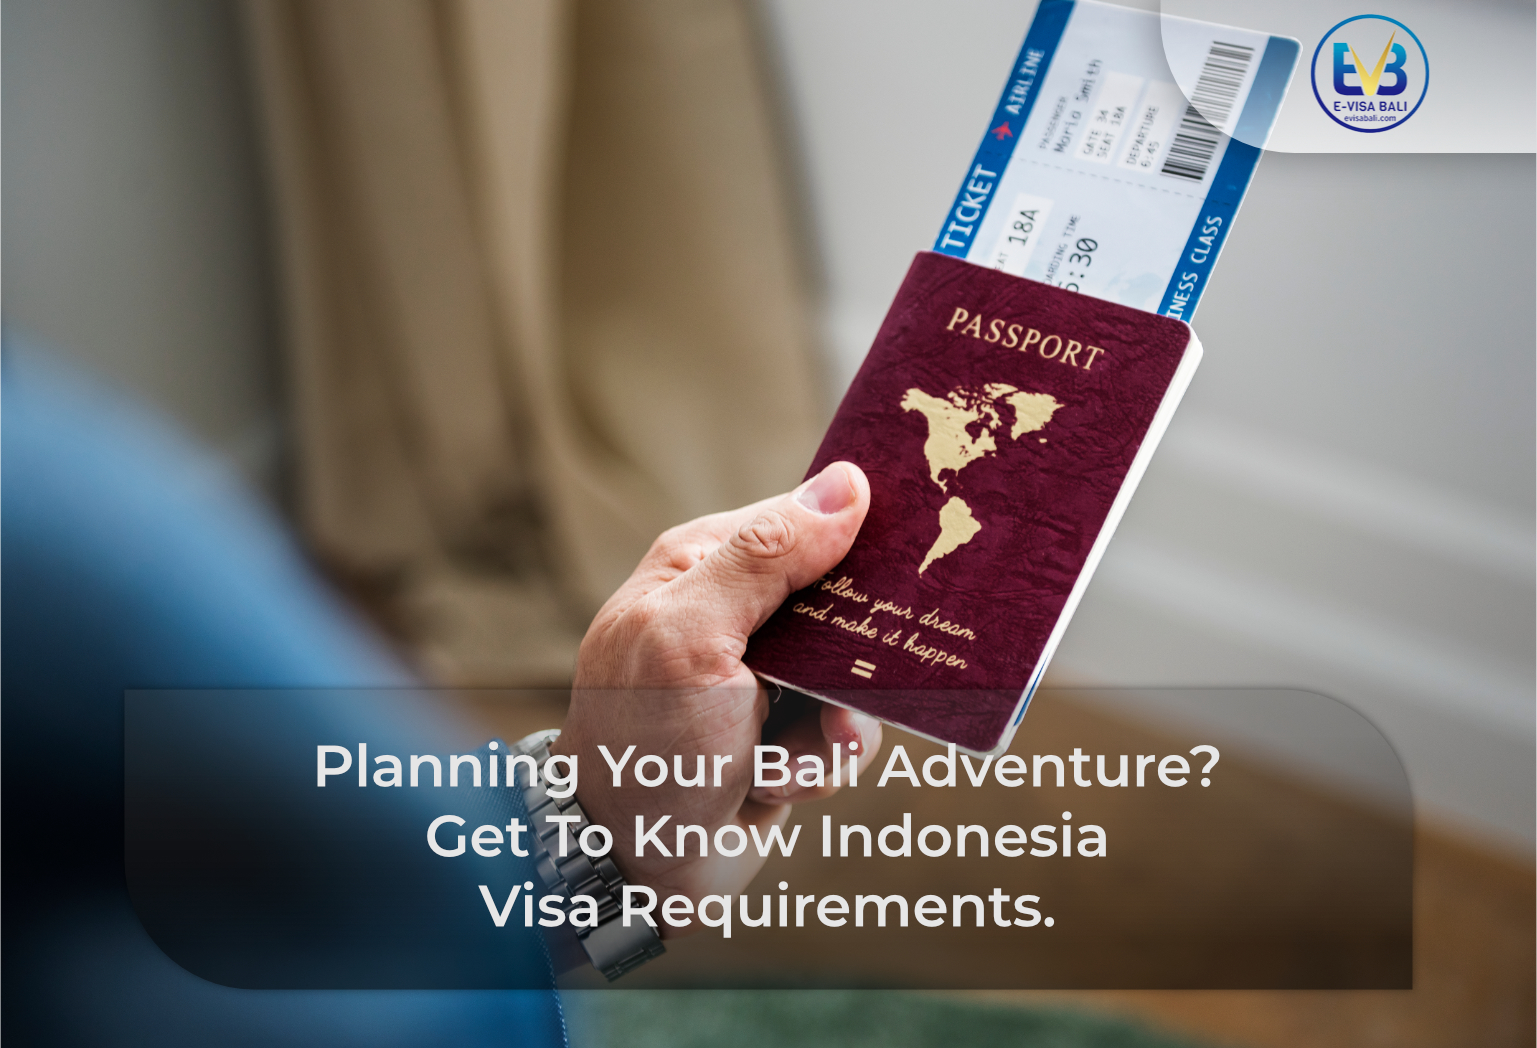 Get To Know Indonesia Visa Requirements EVisaBali